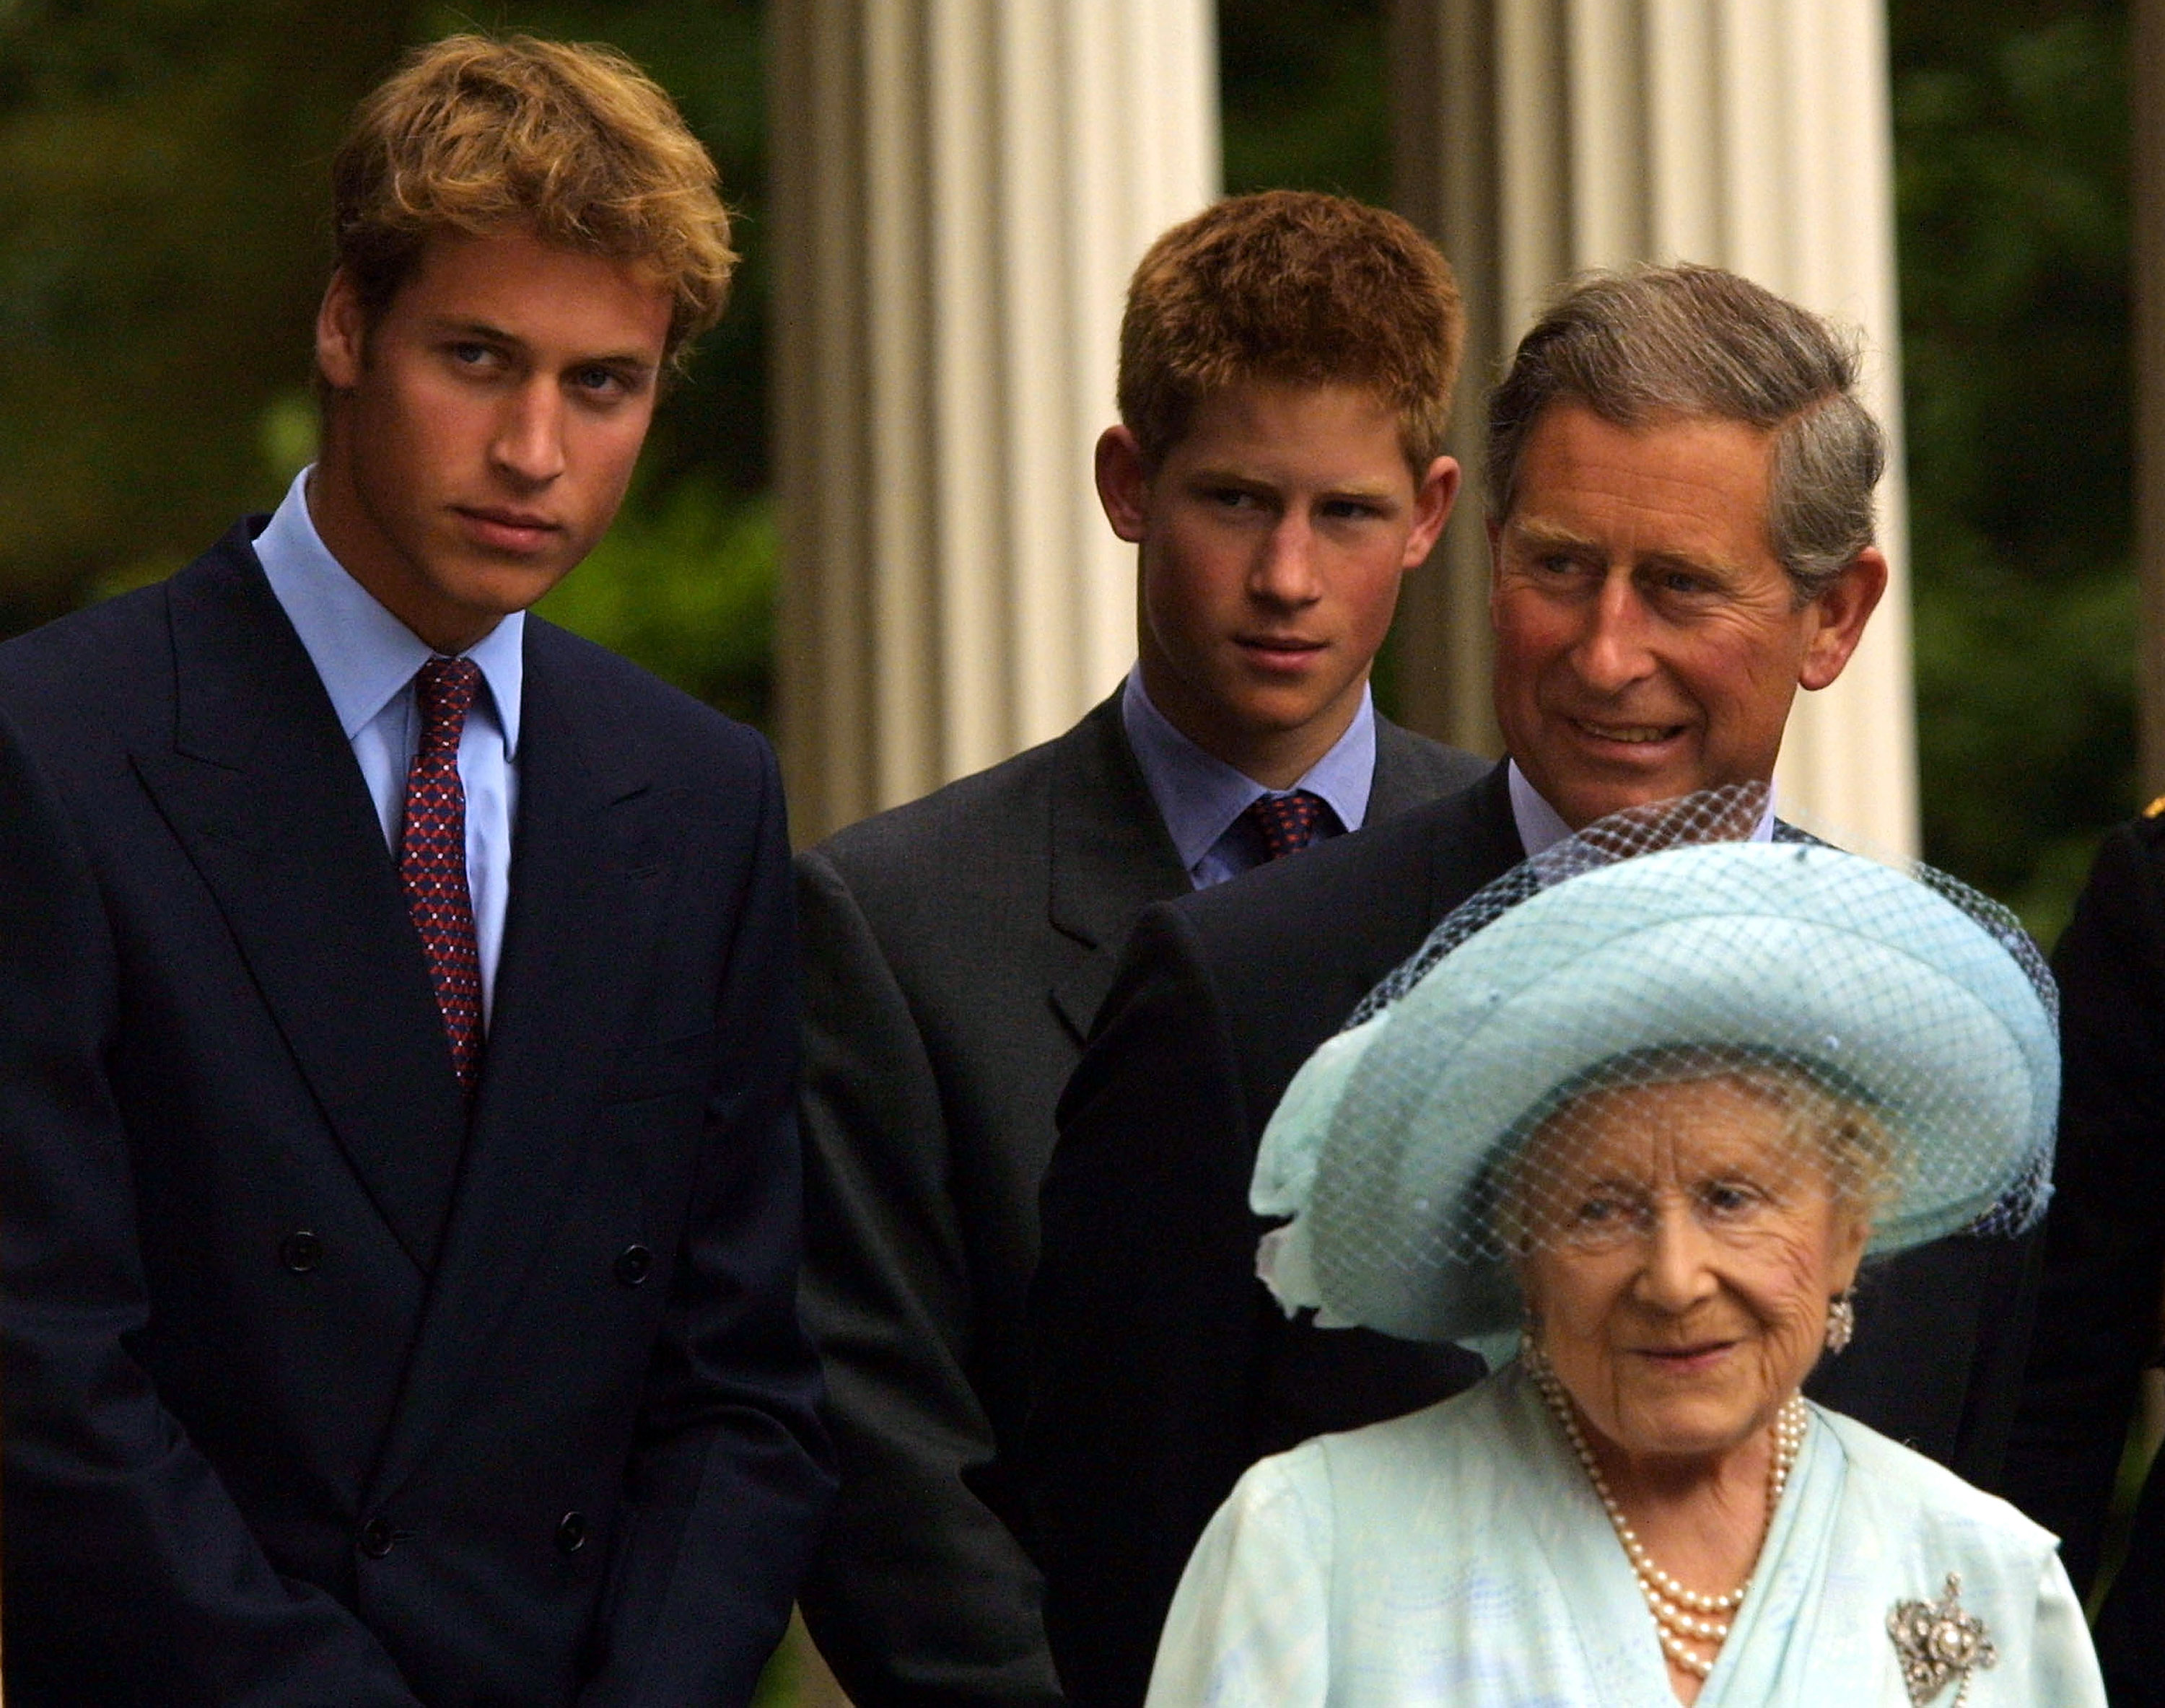 Prince William, Prince Harry, King Charles III and the Queen Mother, Elizabeth Bowes-Lyon during her 101st birthday celebrations in London, England on August 4, 2001 | Source: Getty Images